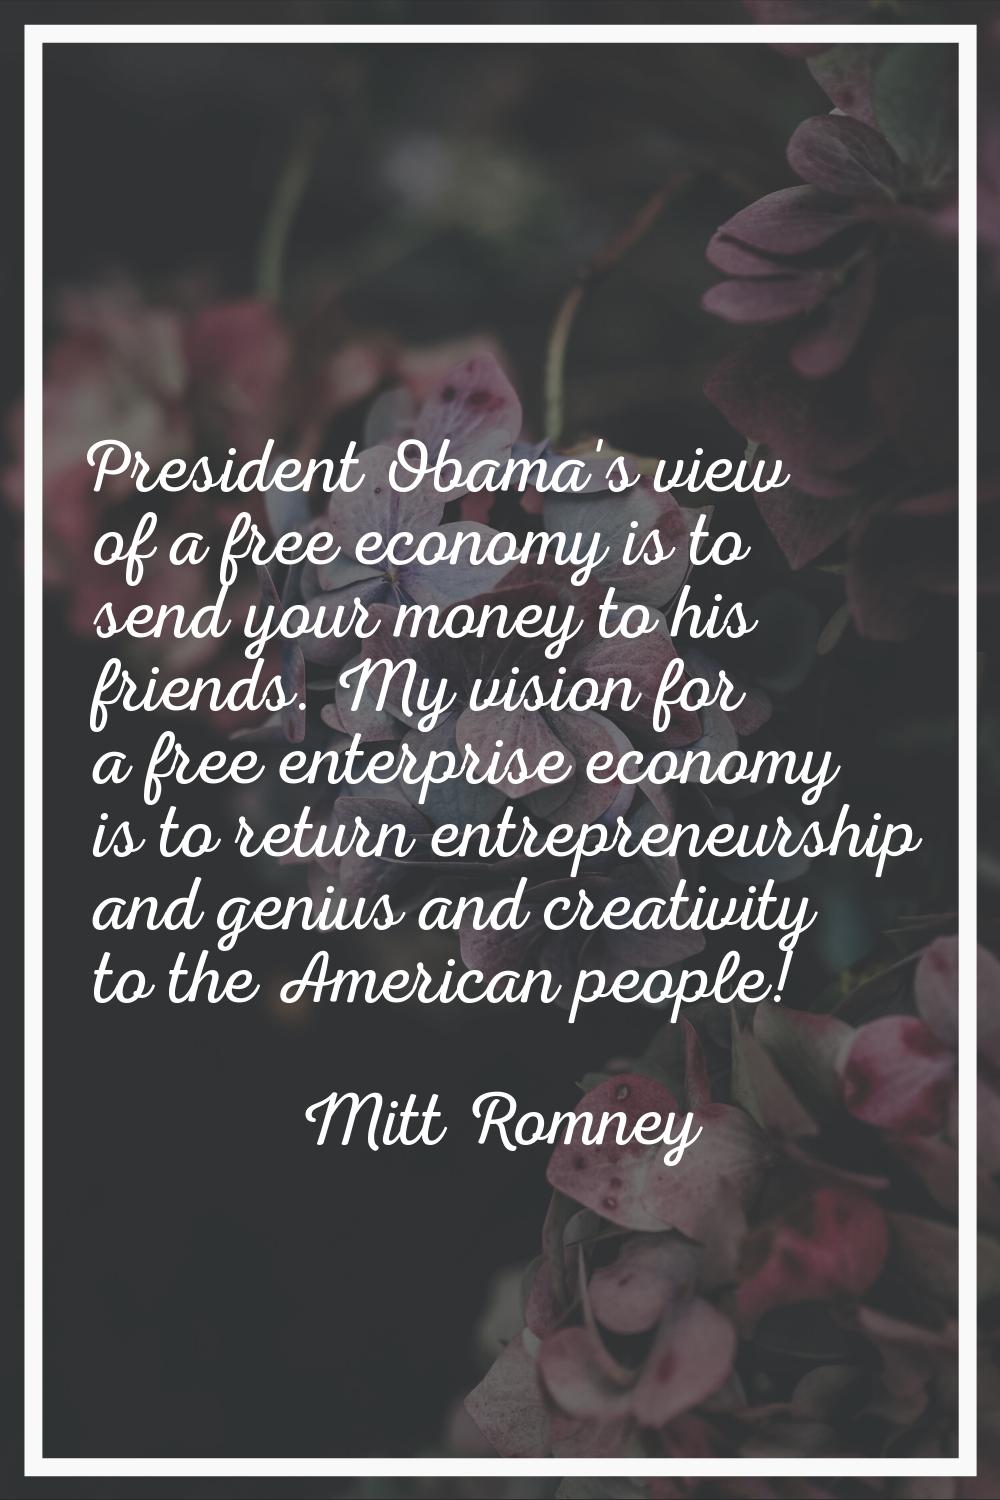 President Obama's view of a free economy is to send your money to his friends. My vision for a free